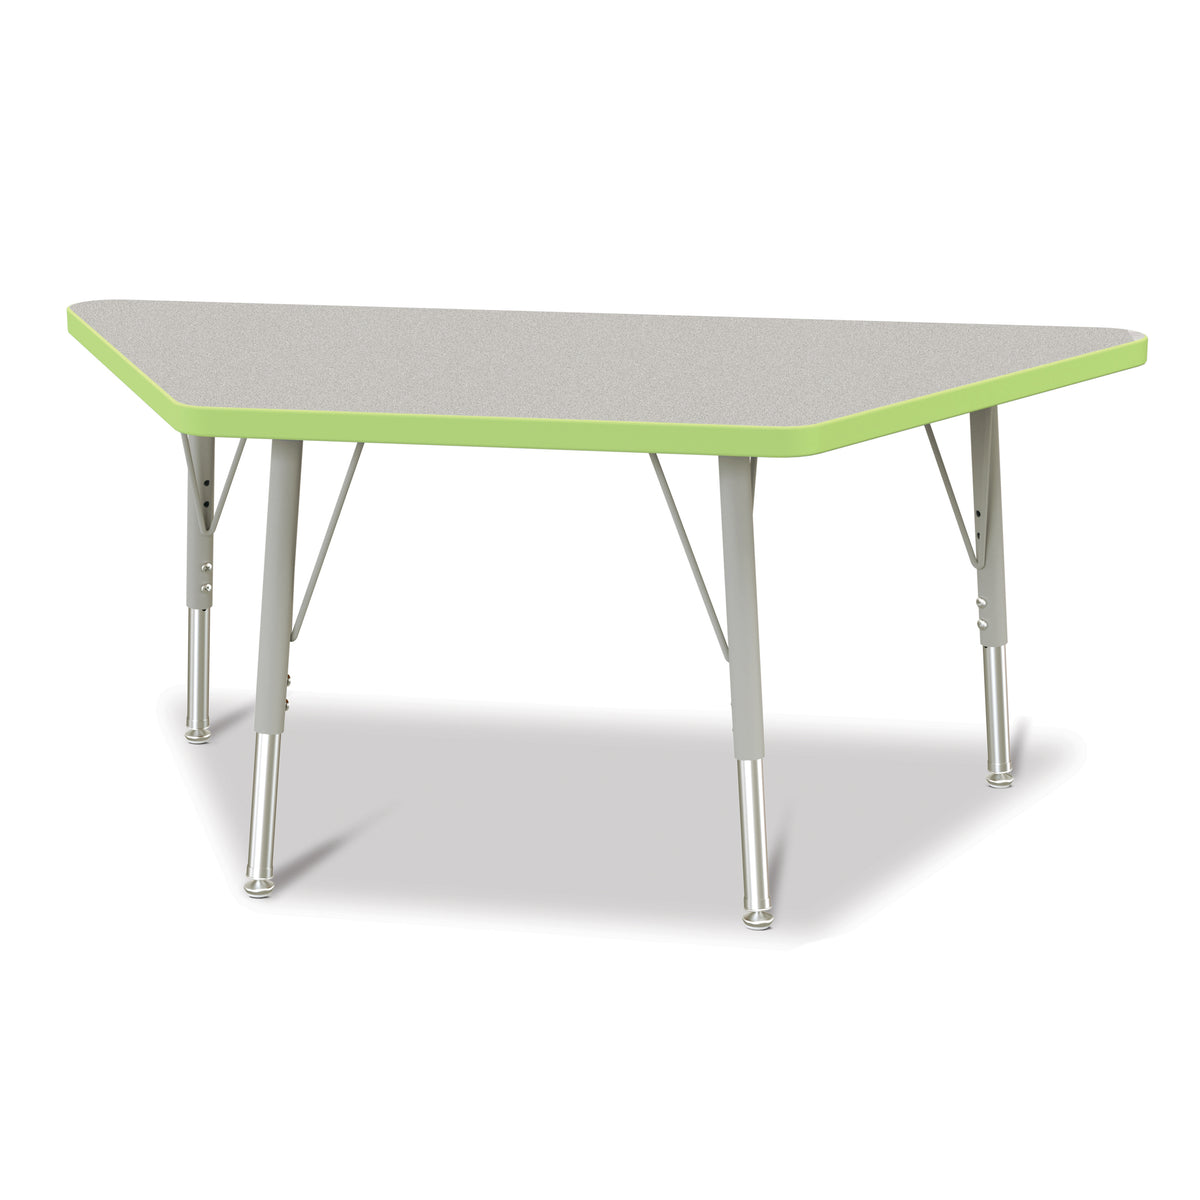 6438JCE130, Berries Trapezoid Activity Tables - 24" X 48", E-height - Freckled Gray/Key Lime/Gray